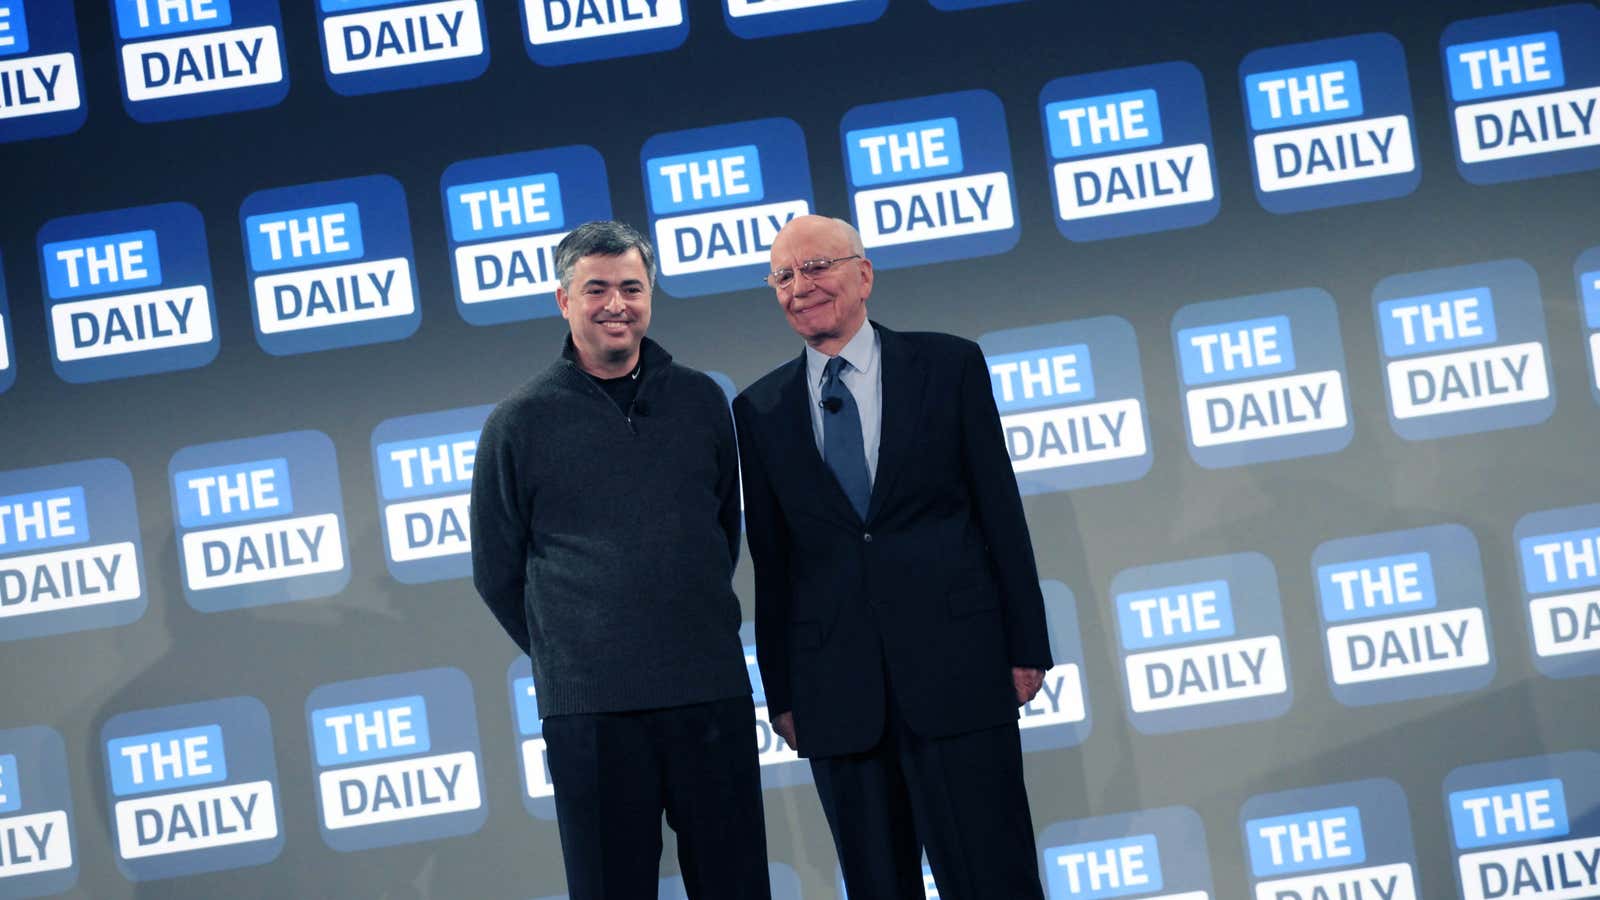 News Corp Chairman and CEO Rupert Murdoch with Apple Vice President Eddie Cue at The Daily’s launch in Feb. 2011.